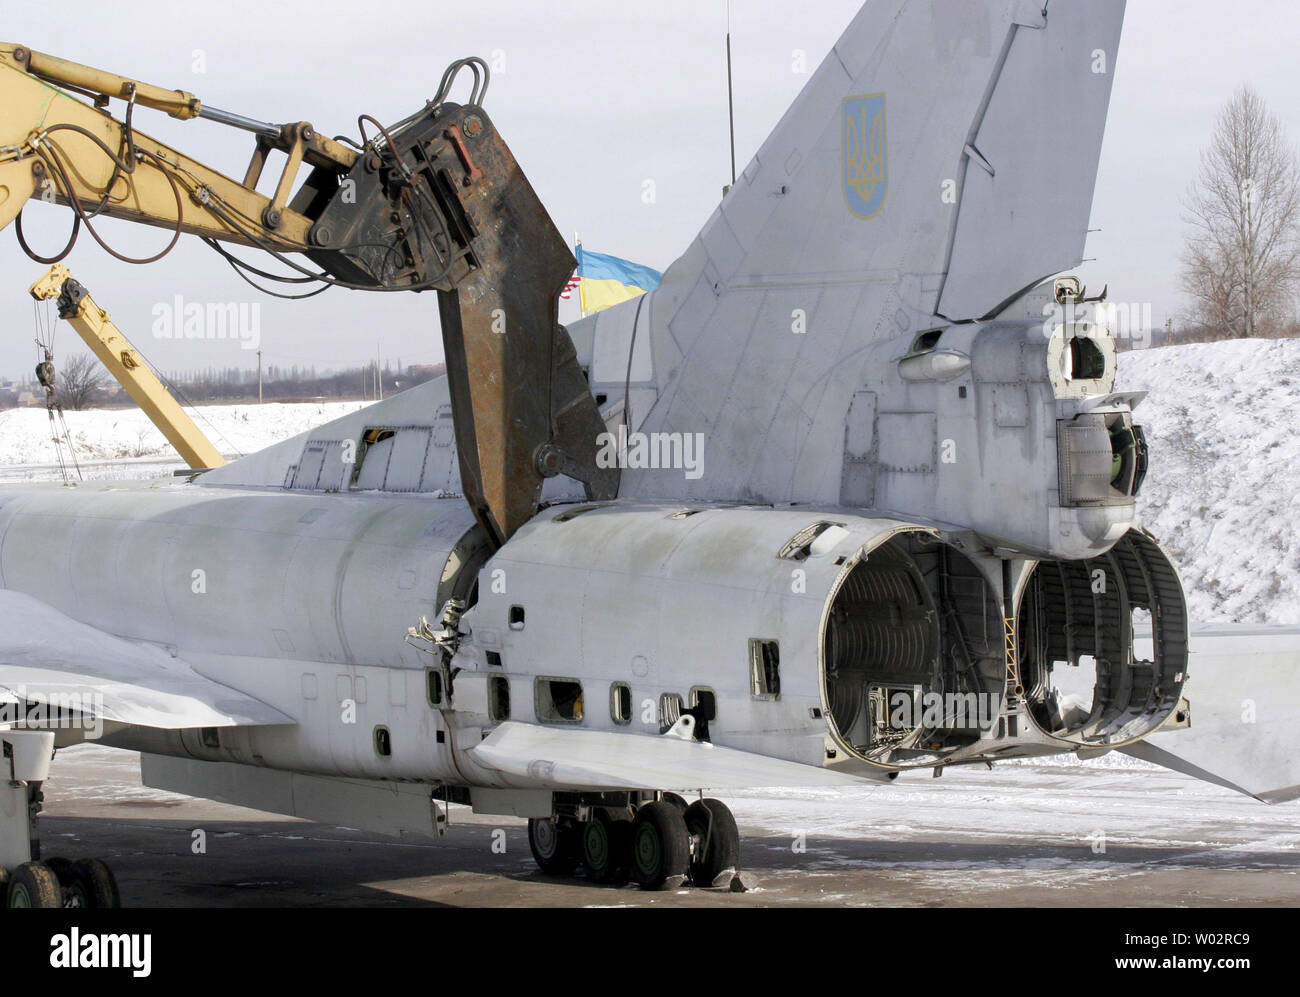 An excavator cuts the last strategic Tupolev Tu-22M3 Backfire bomber at an airbase outside of Ukrainian town Poltava, 200 miles southeast of Kiev, January 27, 2006. Ukraine inherited from the Soviet Union 60 Tu-22 bombers and 423 X-22 cruise missiles and eliminate them according to the 1993 agreement with US on the elimination of strategic nuclear weapons and nuclear non-proliferation. (UPI Photo/Sergey Starostenko) Stock Photo